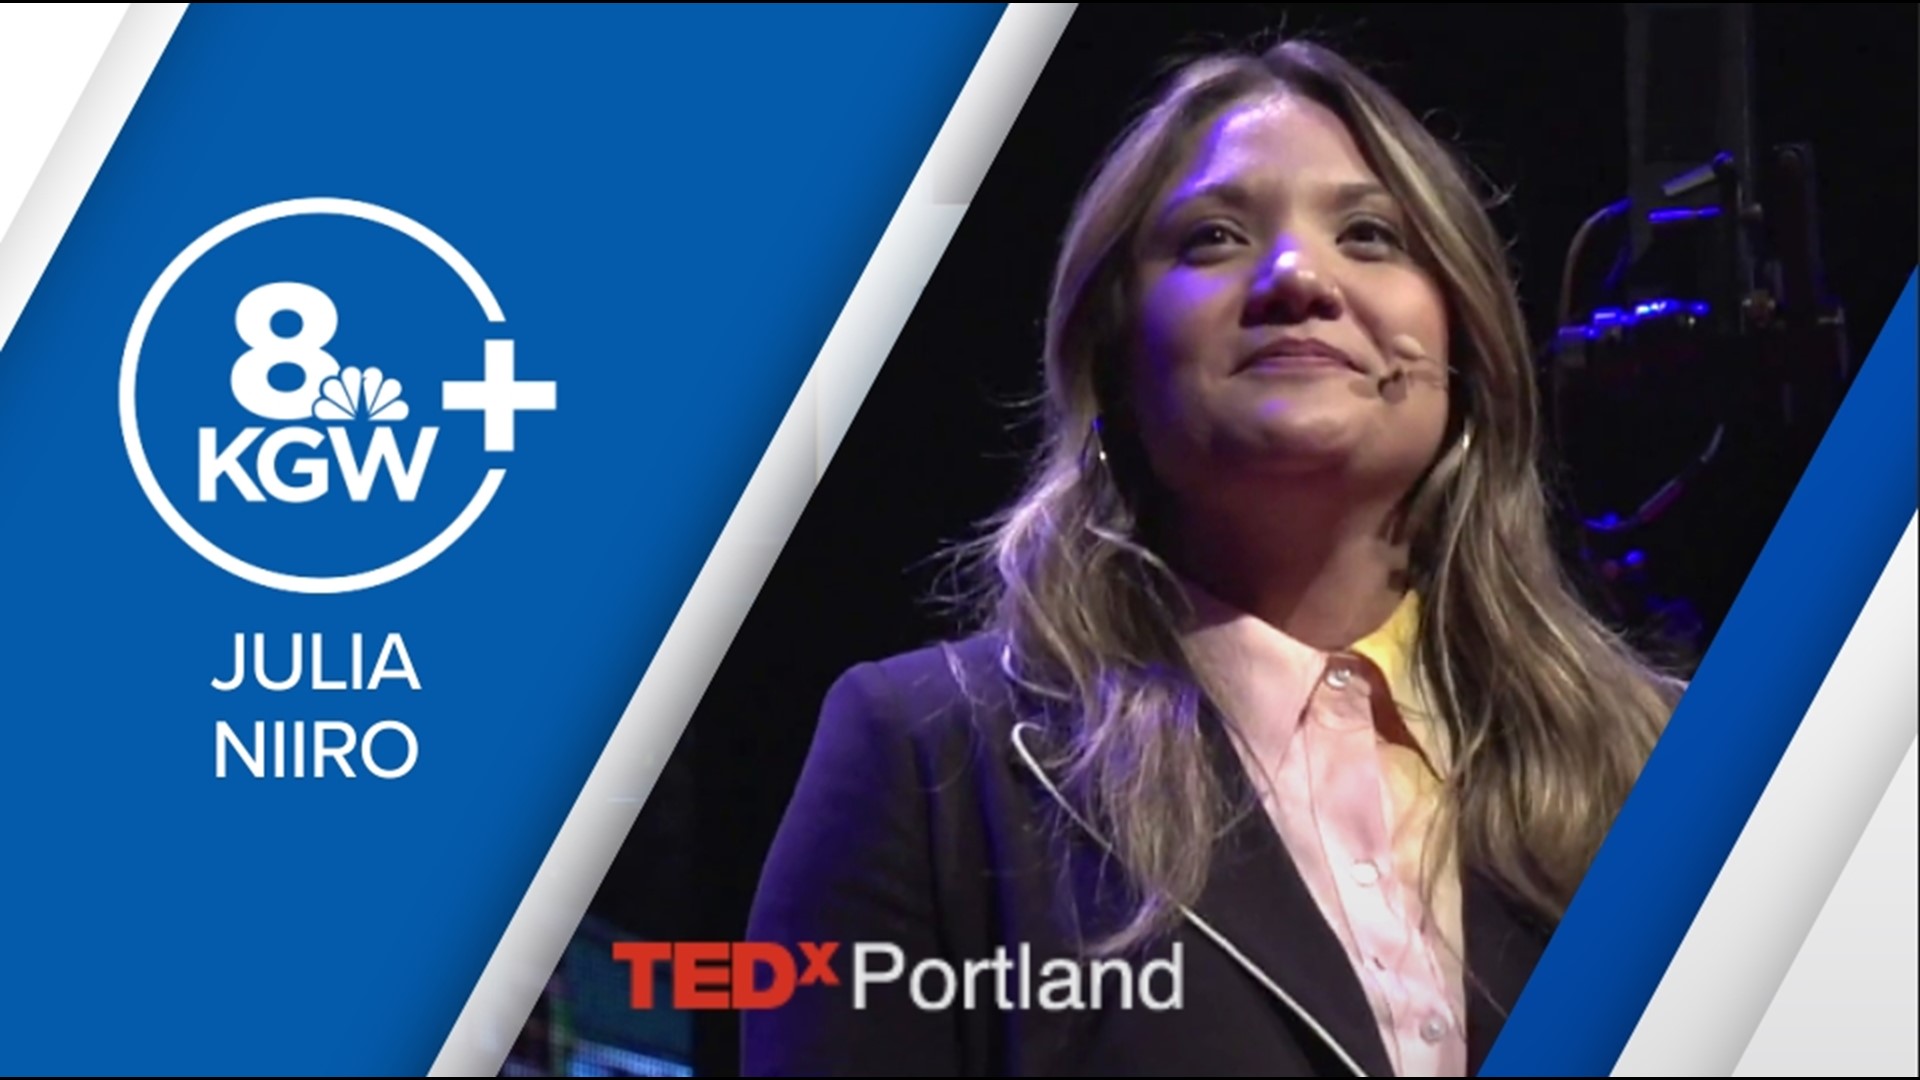 Julia Niiro left a successful corporate job to start a company to help local farmers. Her talk is about what she thinks need to be done to save the American farm.